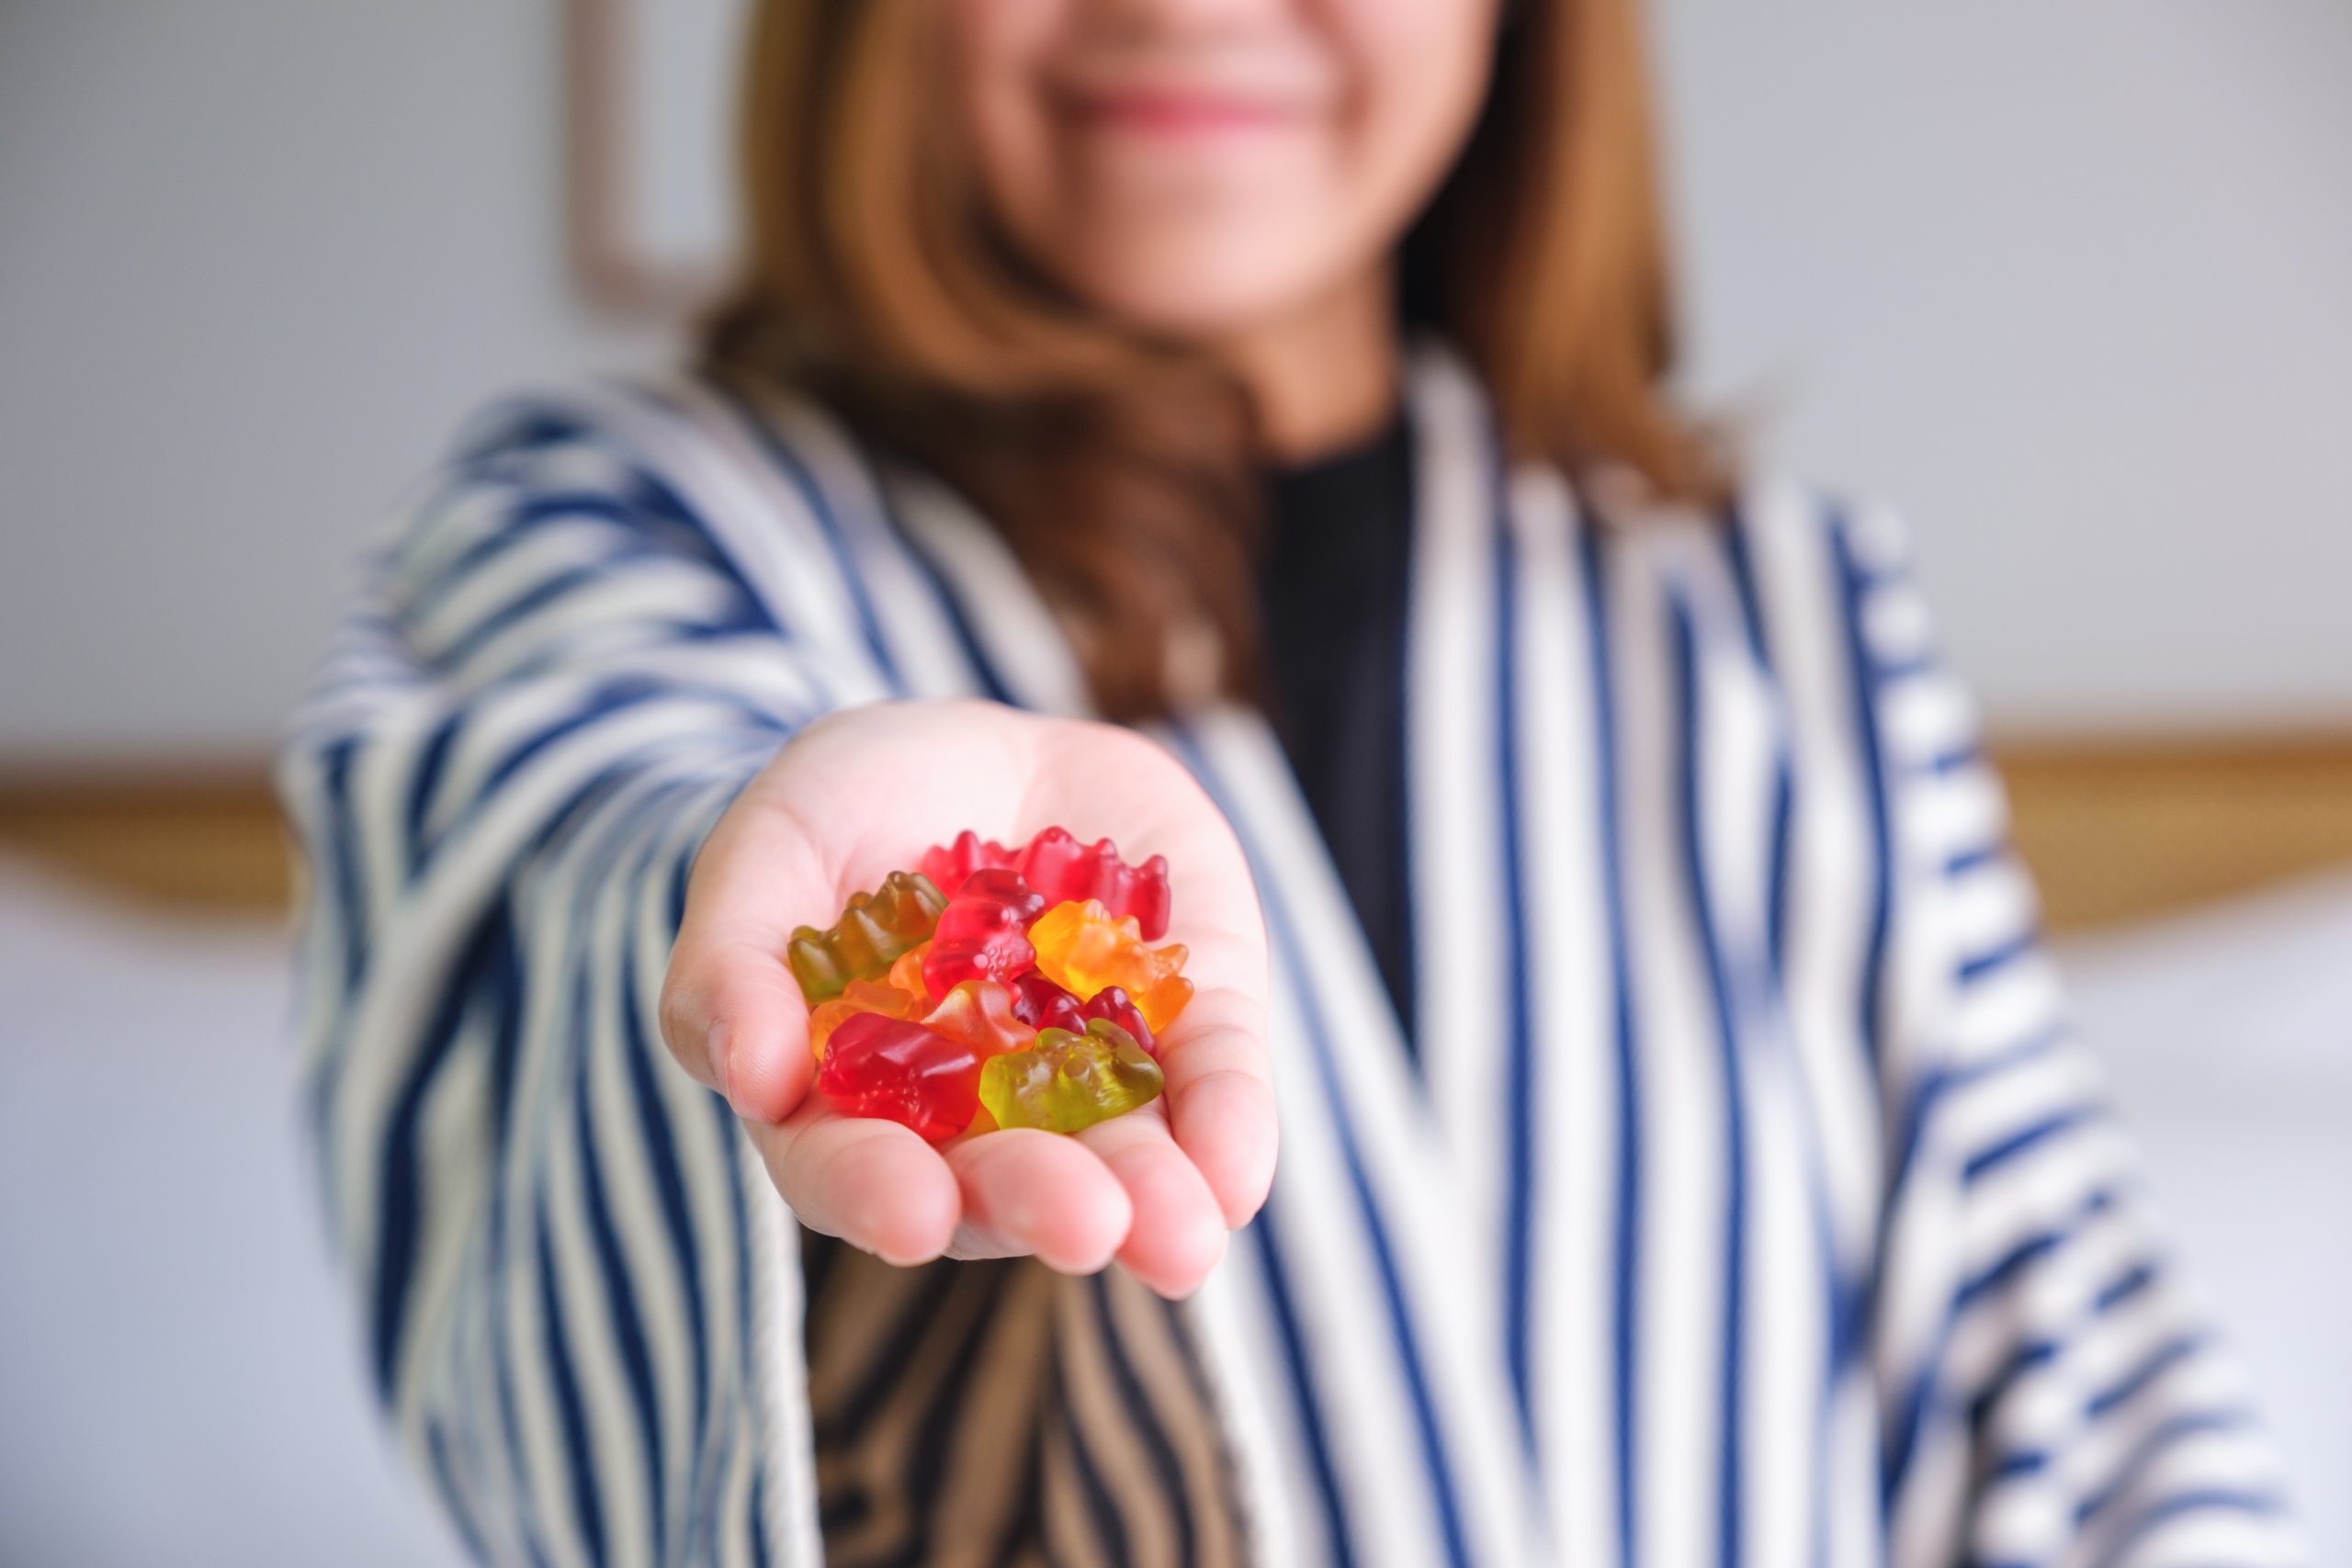 A young woman in a striped blazer smiling and holding a handful of colorful keto diet gummies directly towards the camera, suggesting a health-conscious alternative to traditional sweets.